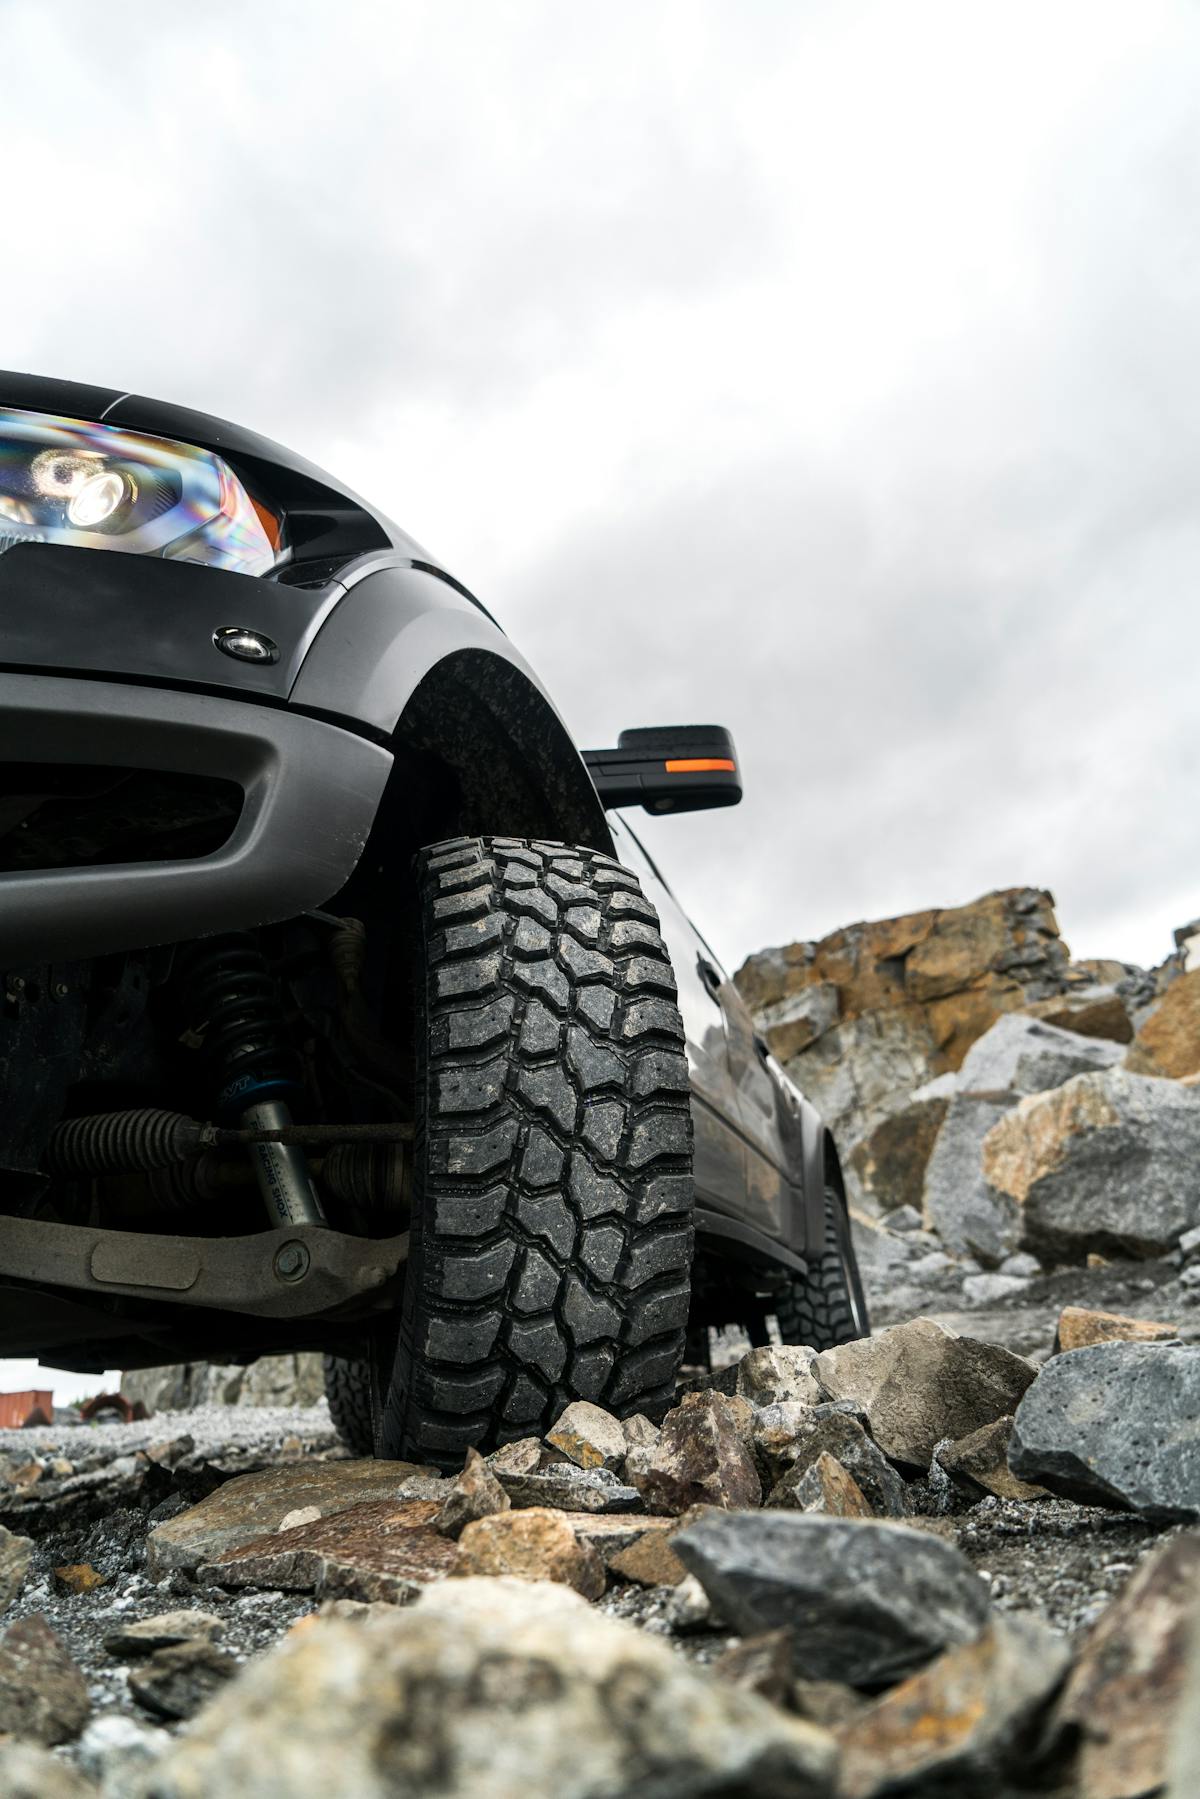 nokian-rockproof-tire-has-professional-off-roaders-in-mind